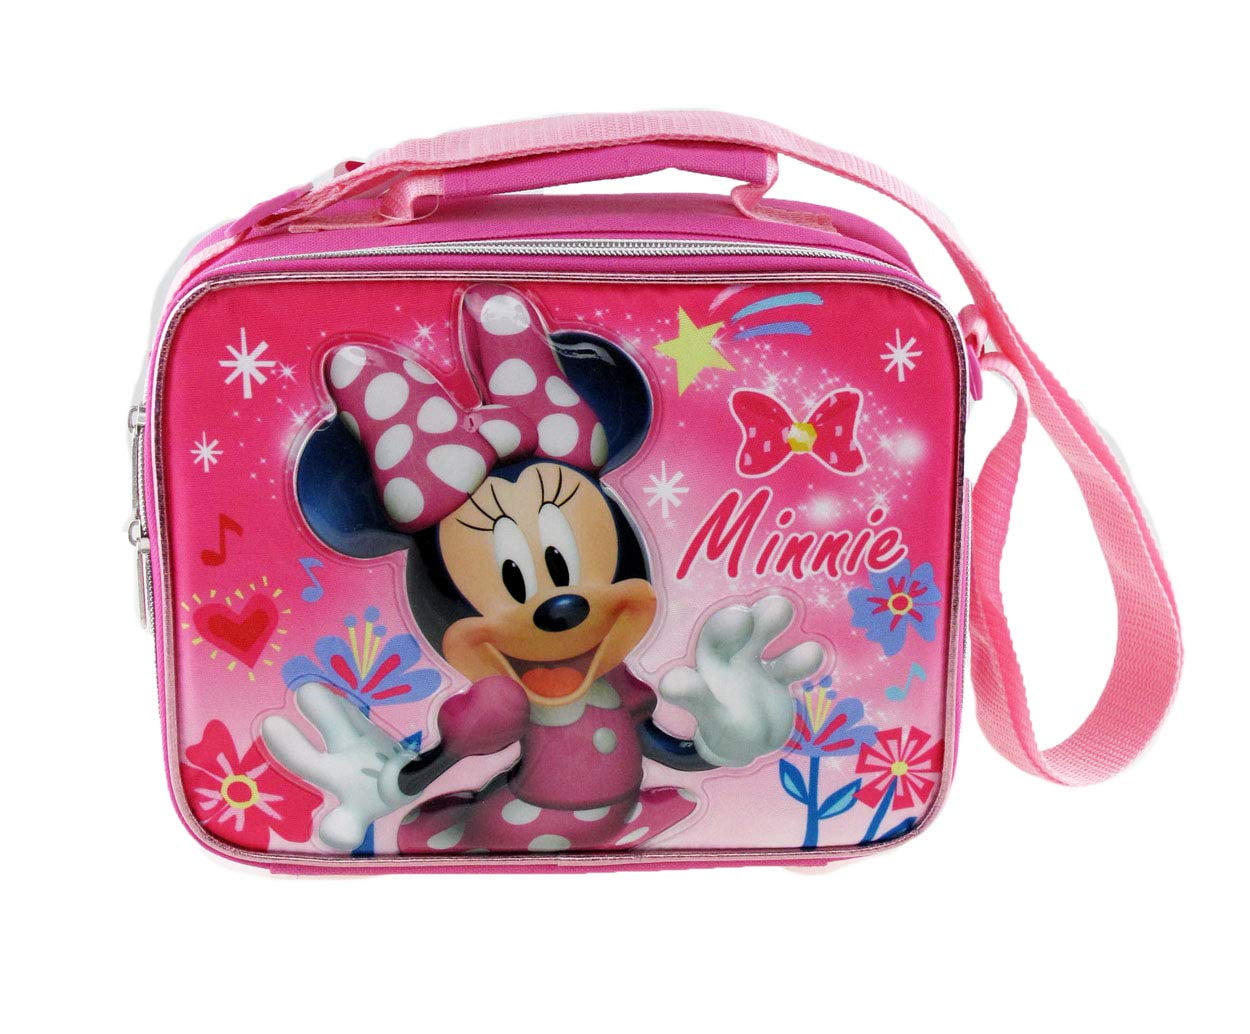 Minnie Mouse Tote Lunch Bag Heat Insulate W27.5×H16.5×D10cm Cute Japan F/S New 